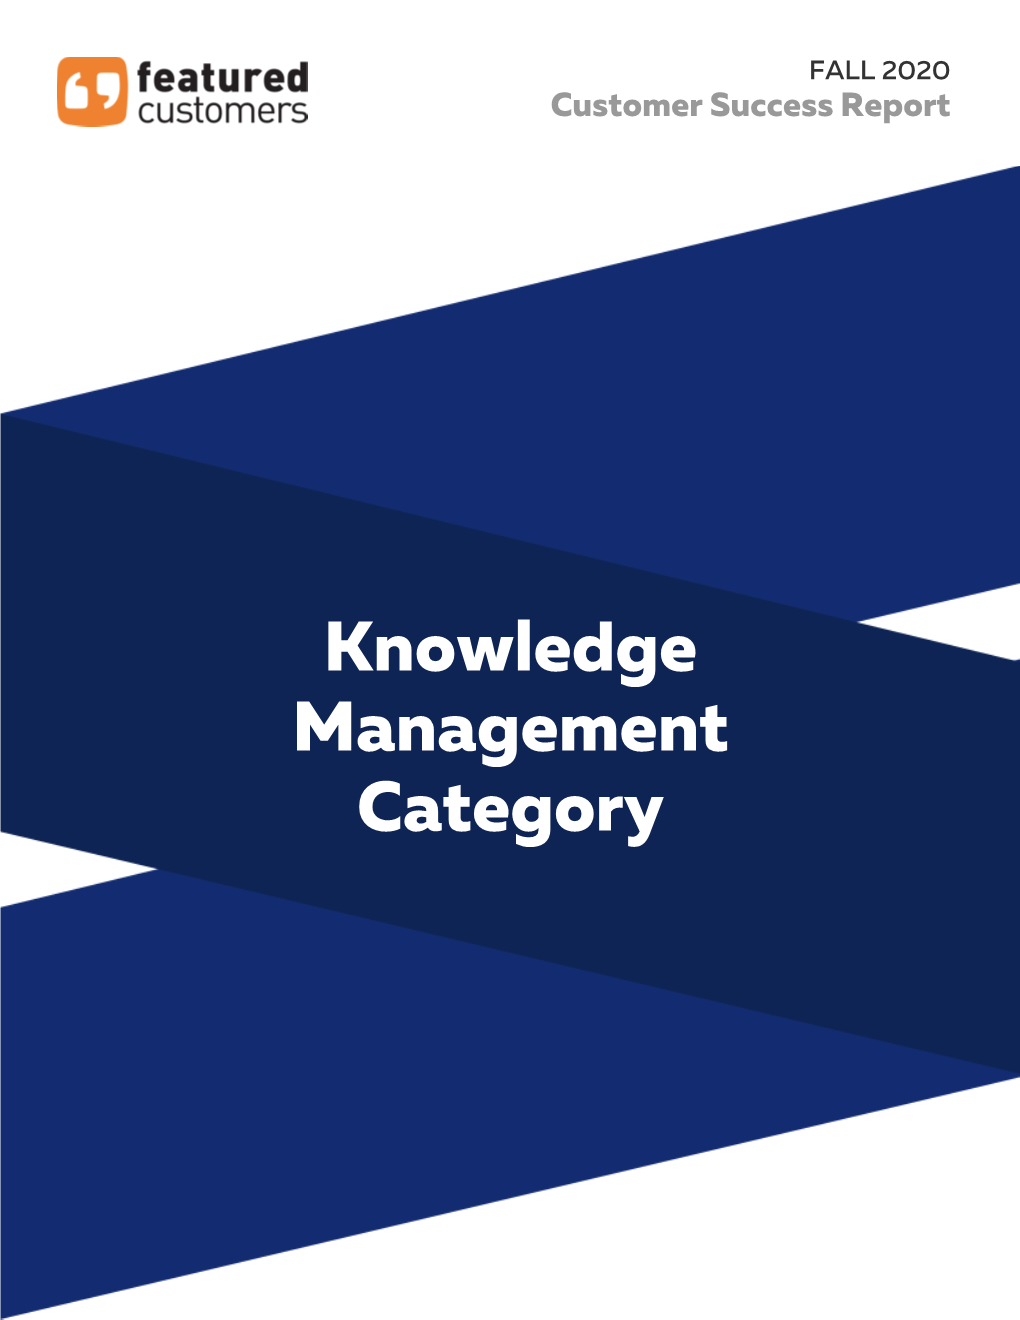 FALL 2020 Knowledge Management Category